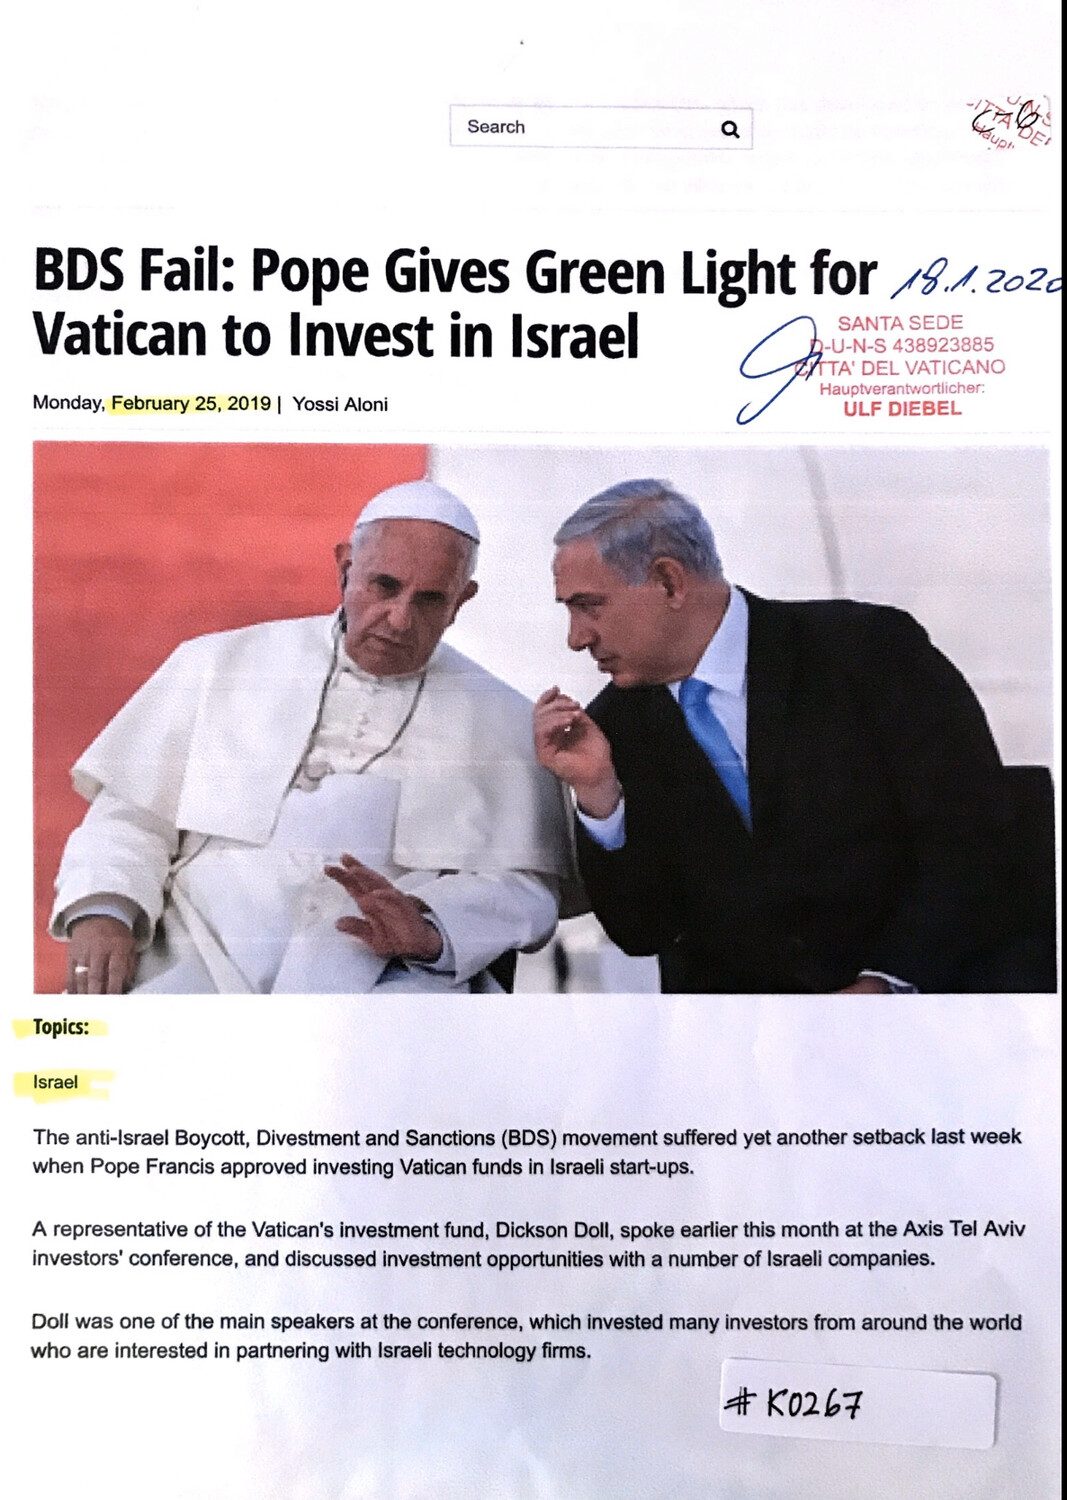 #K0267 l BDS Fail: Pope Gives Green Light for Vatican to Invest in Israel 